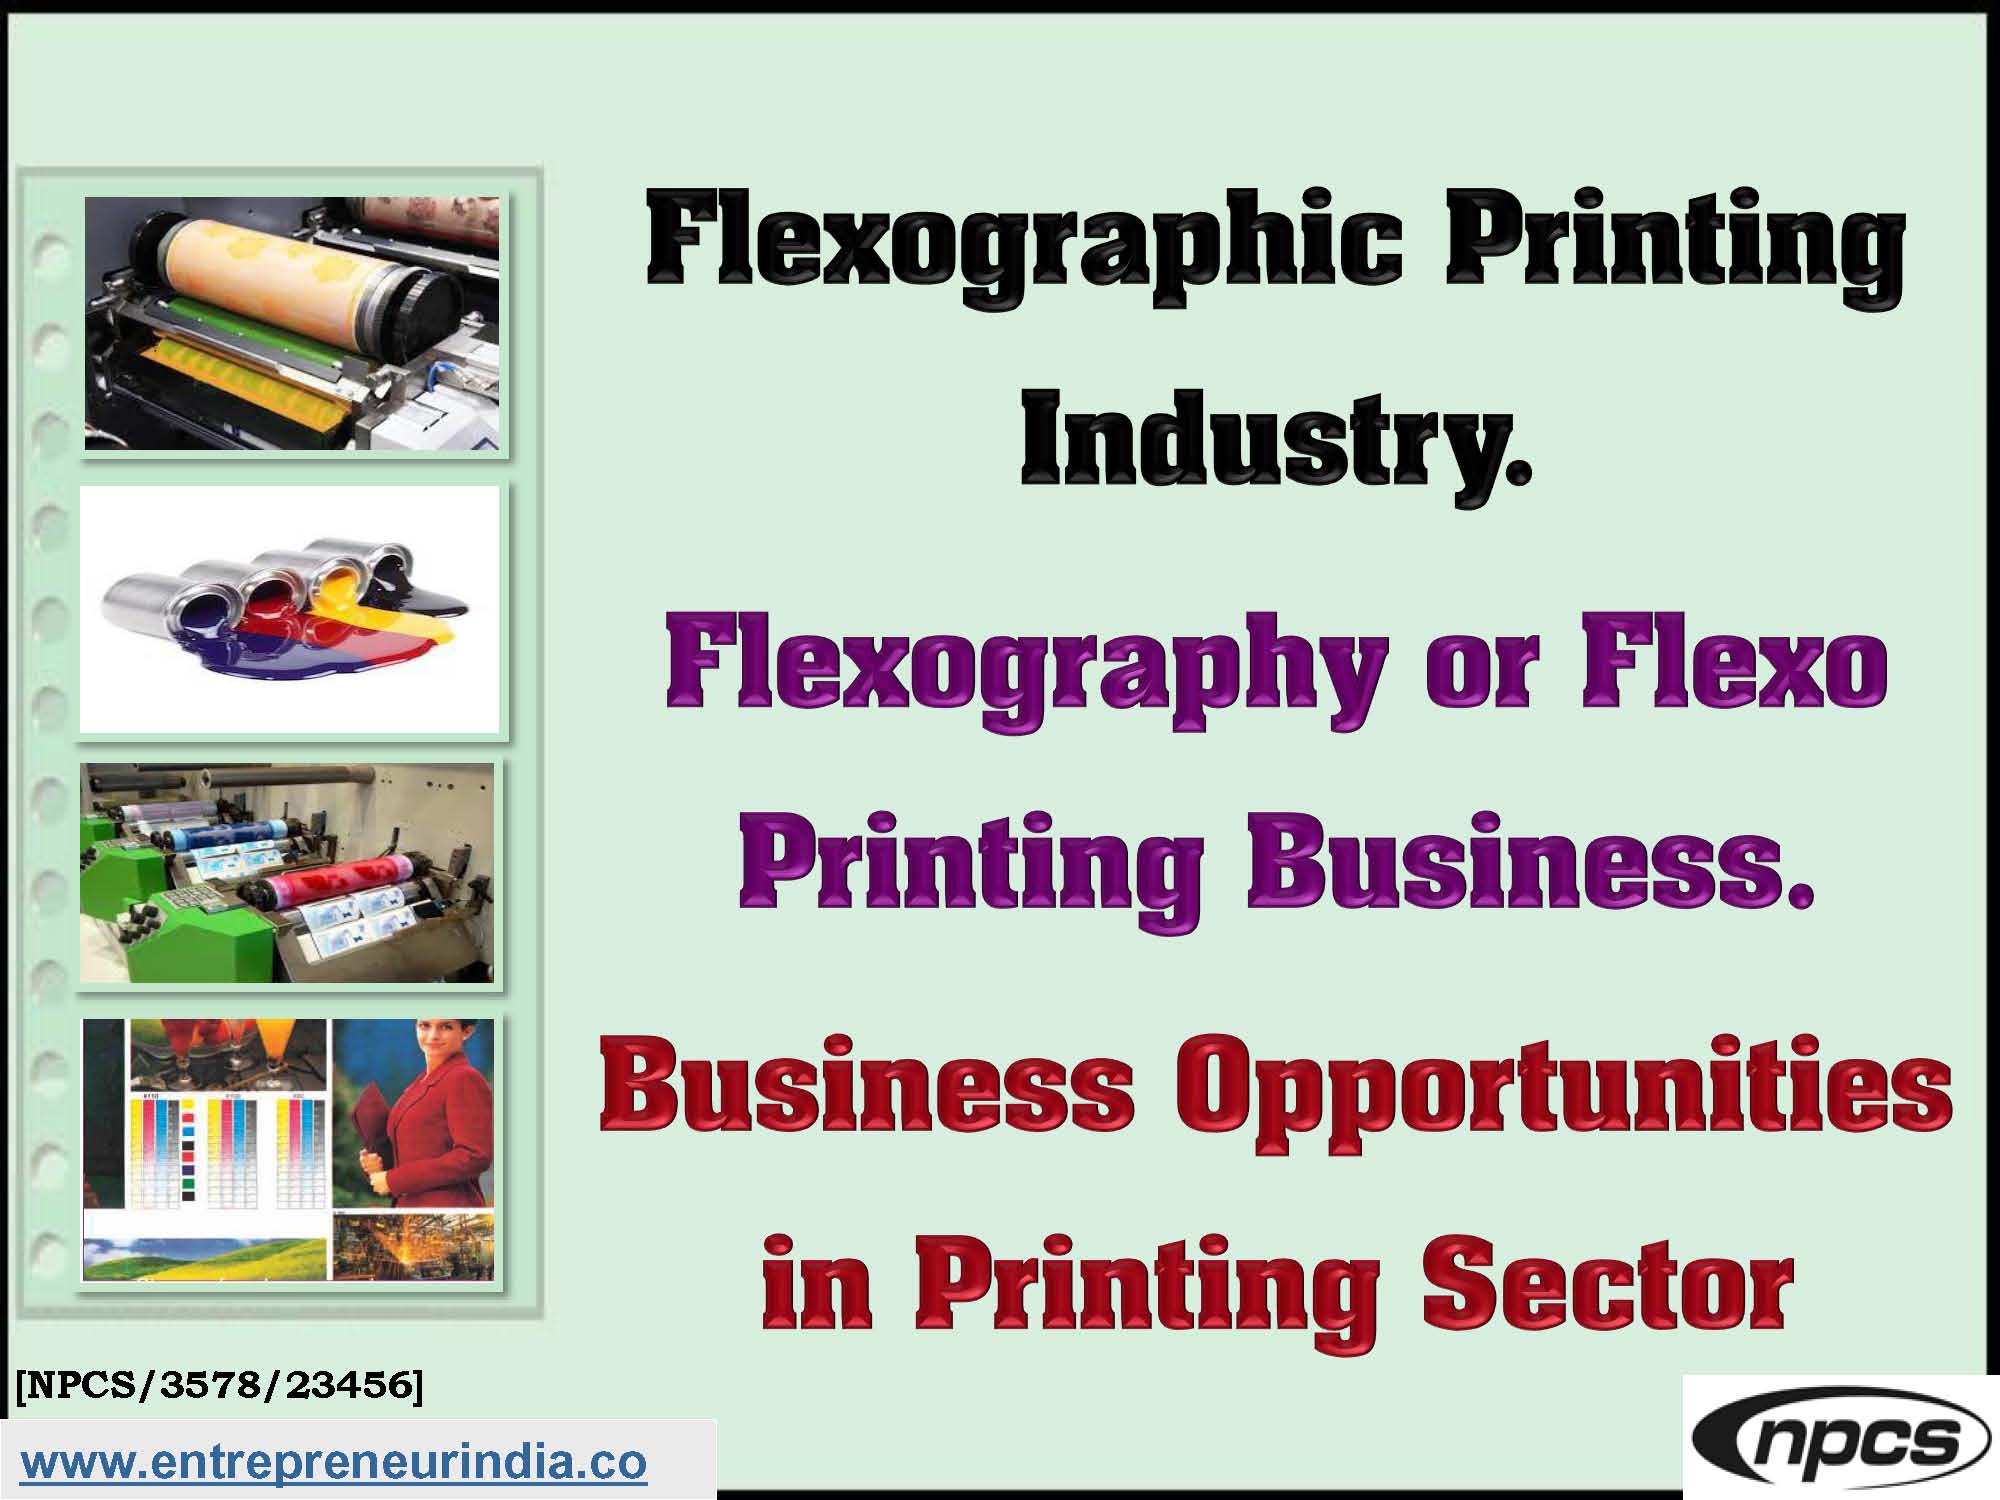 Flexographic Printing Industry